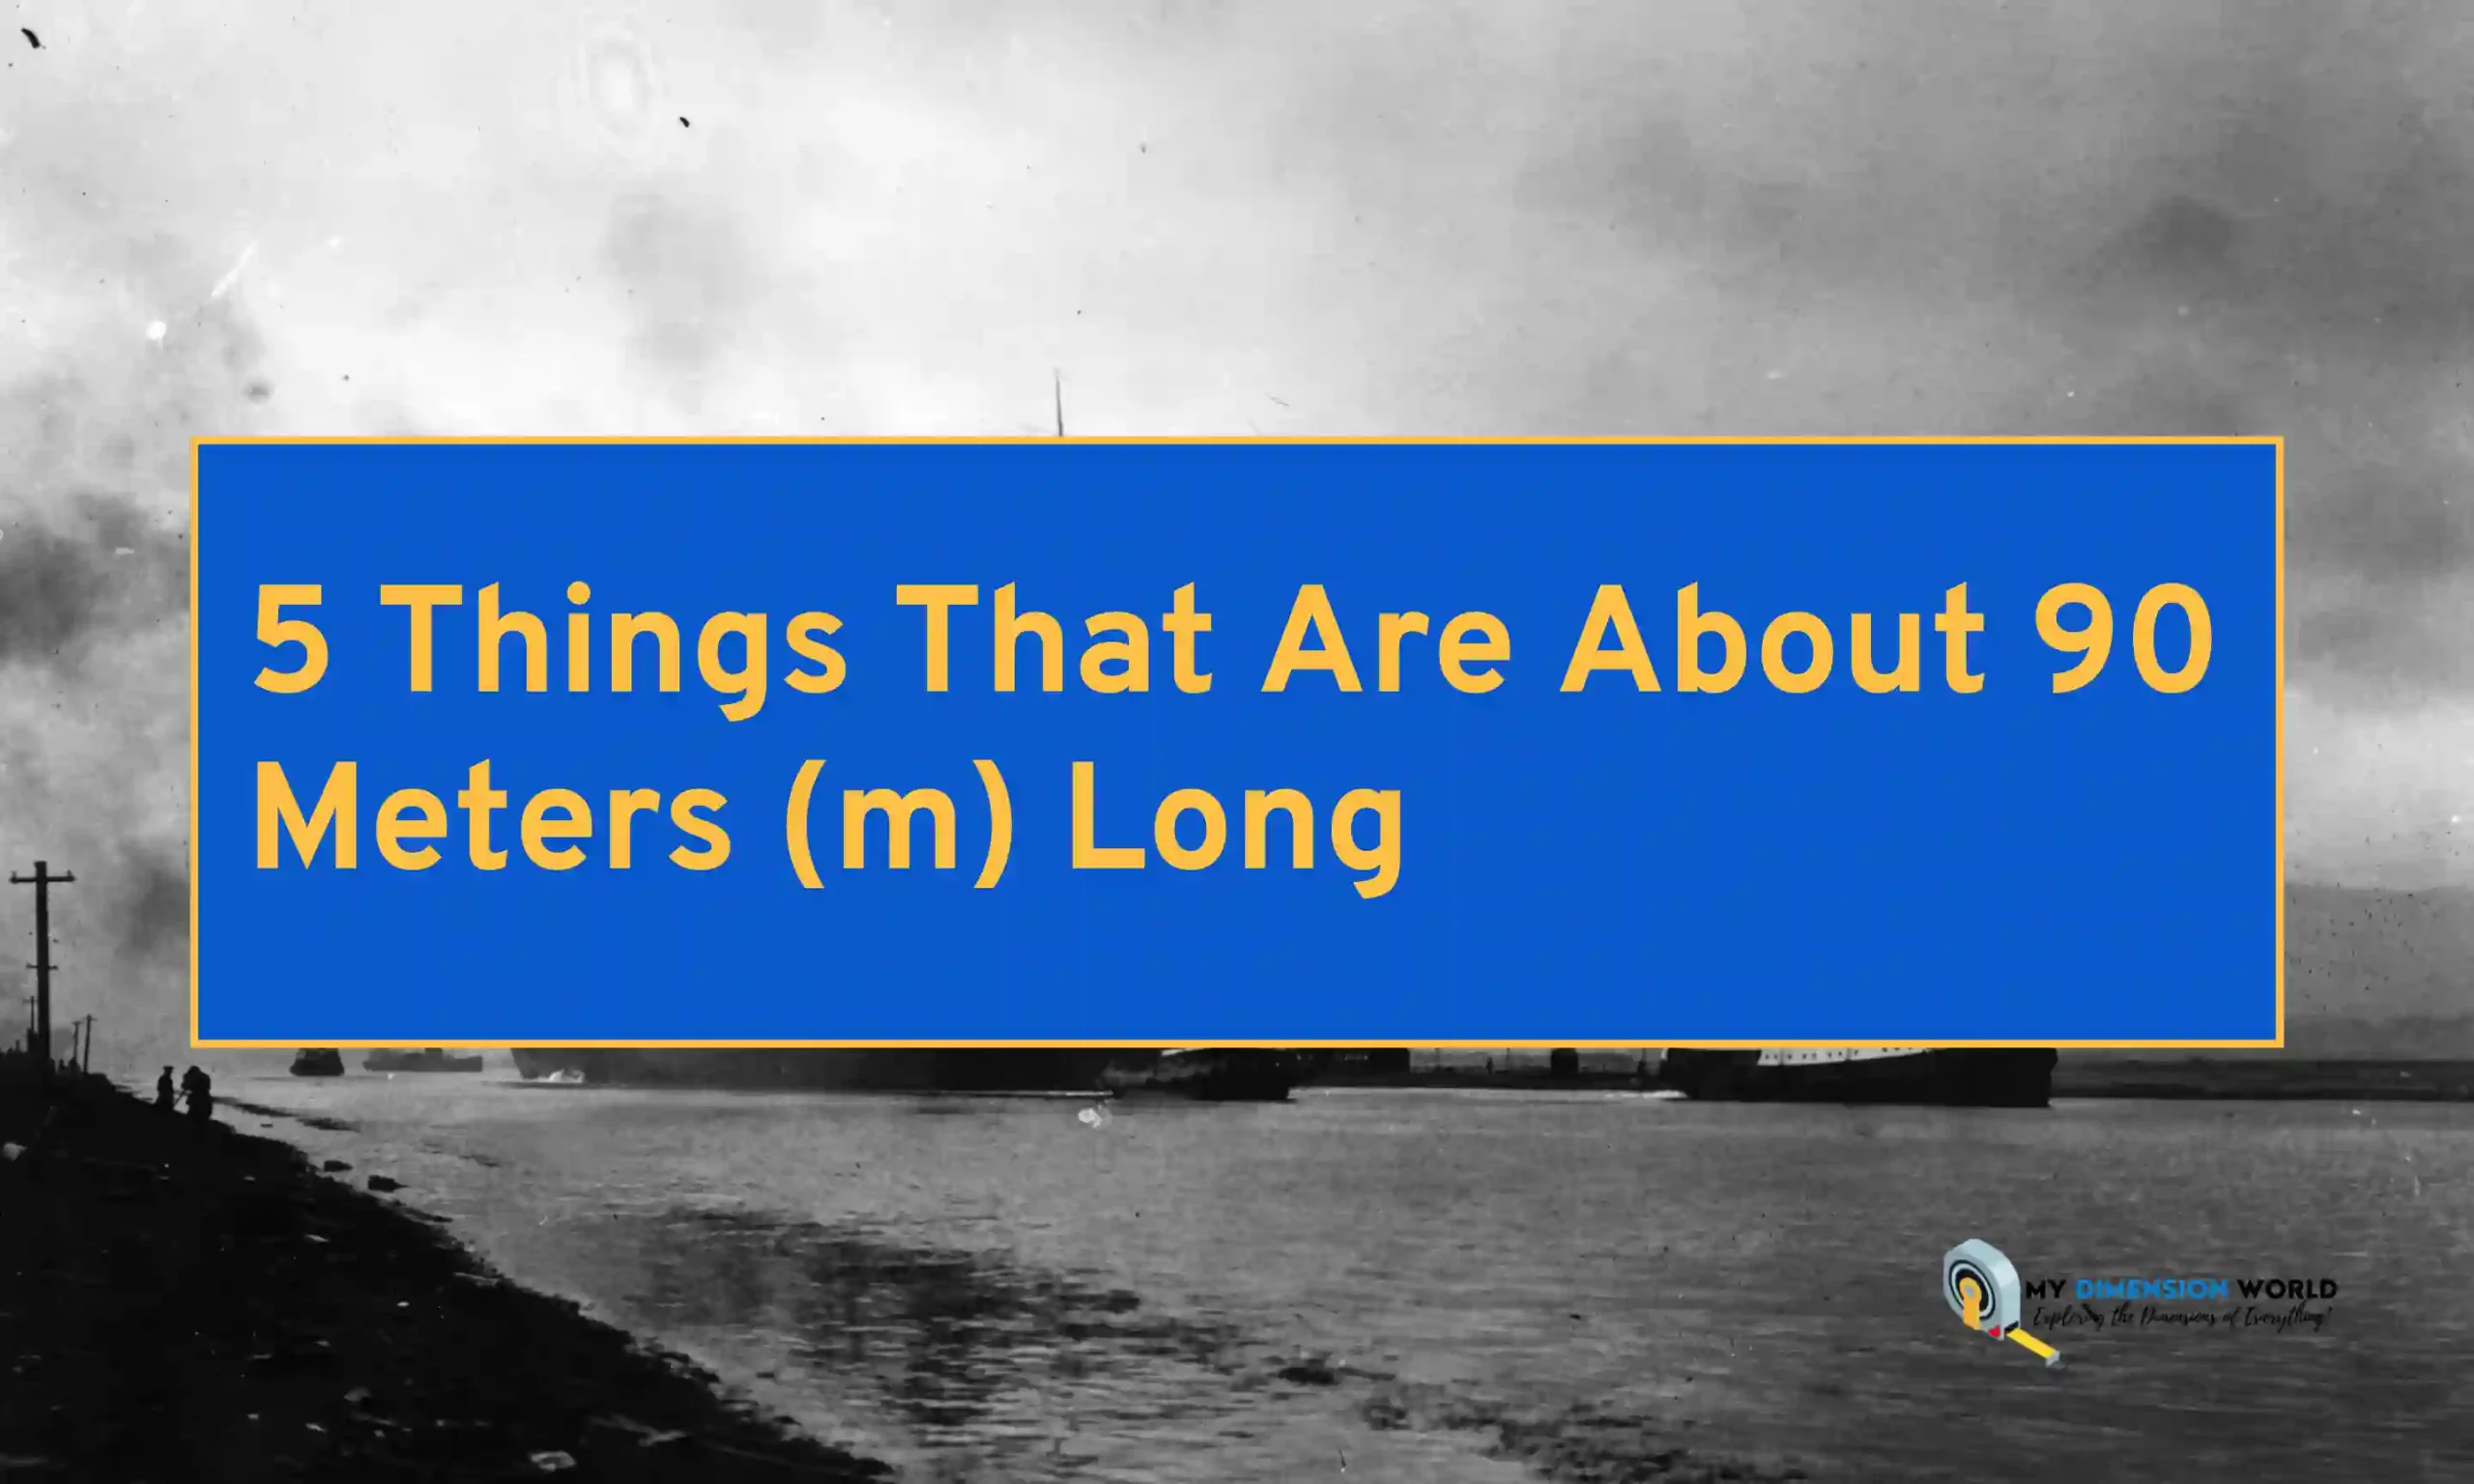 5 Things That Are About 90 Meters (m) Long